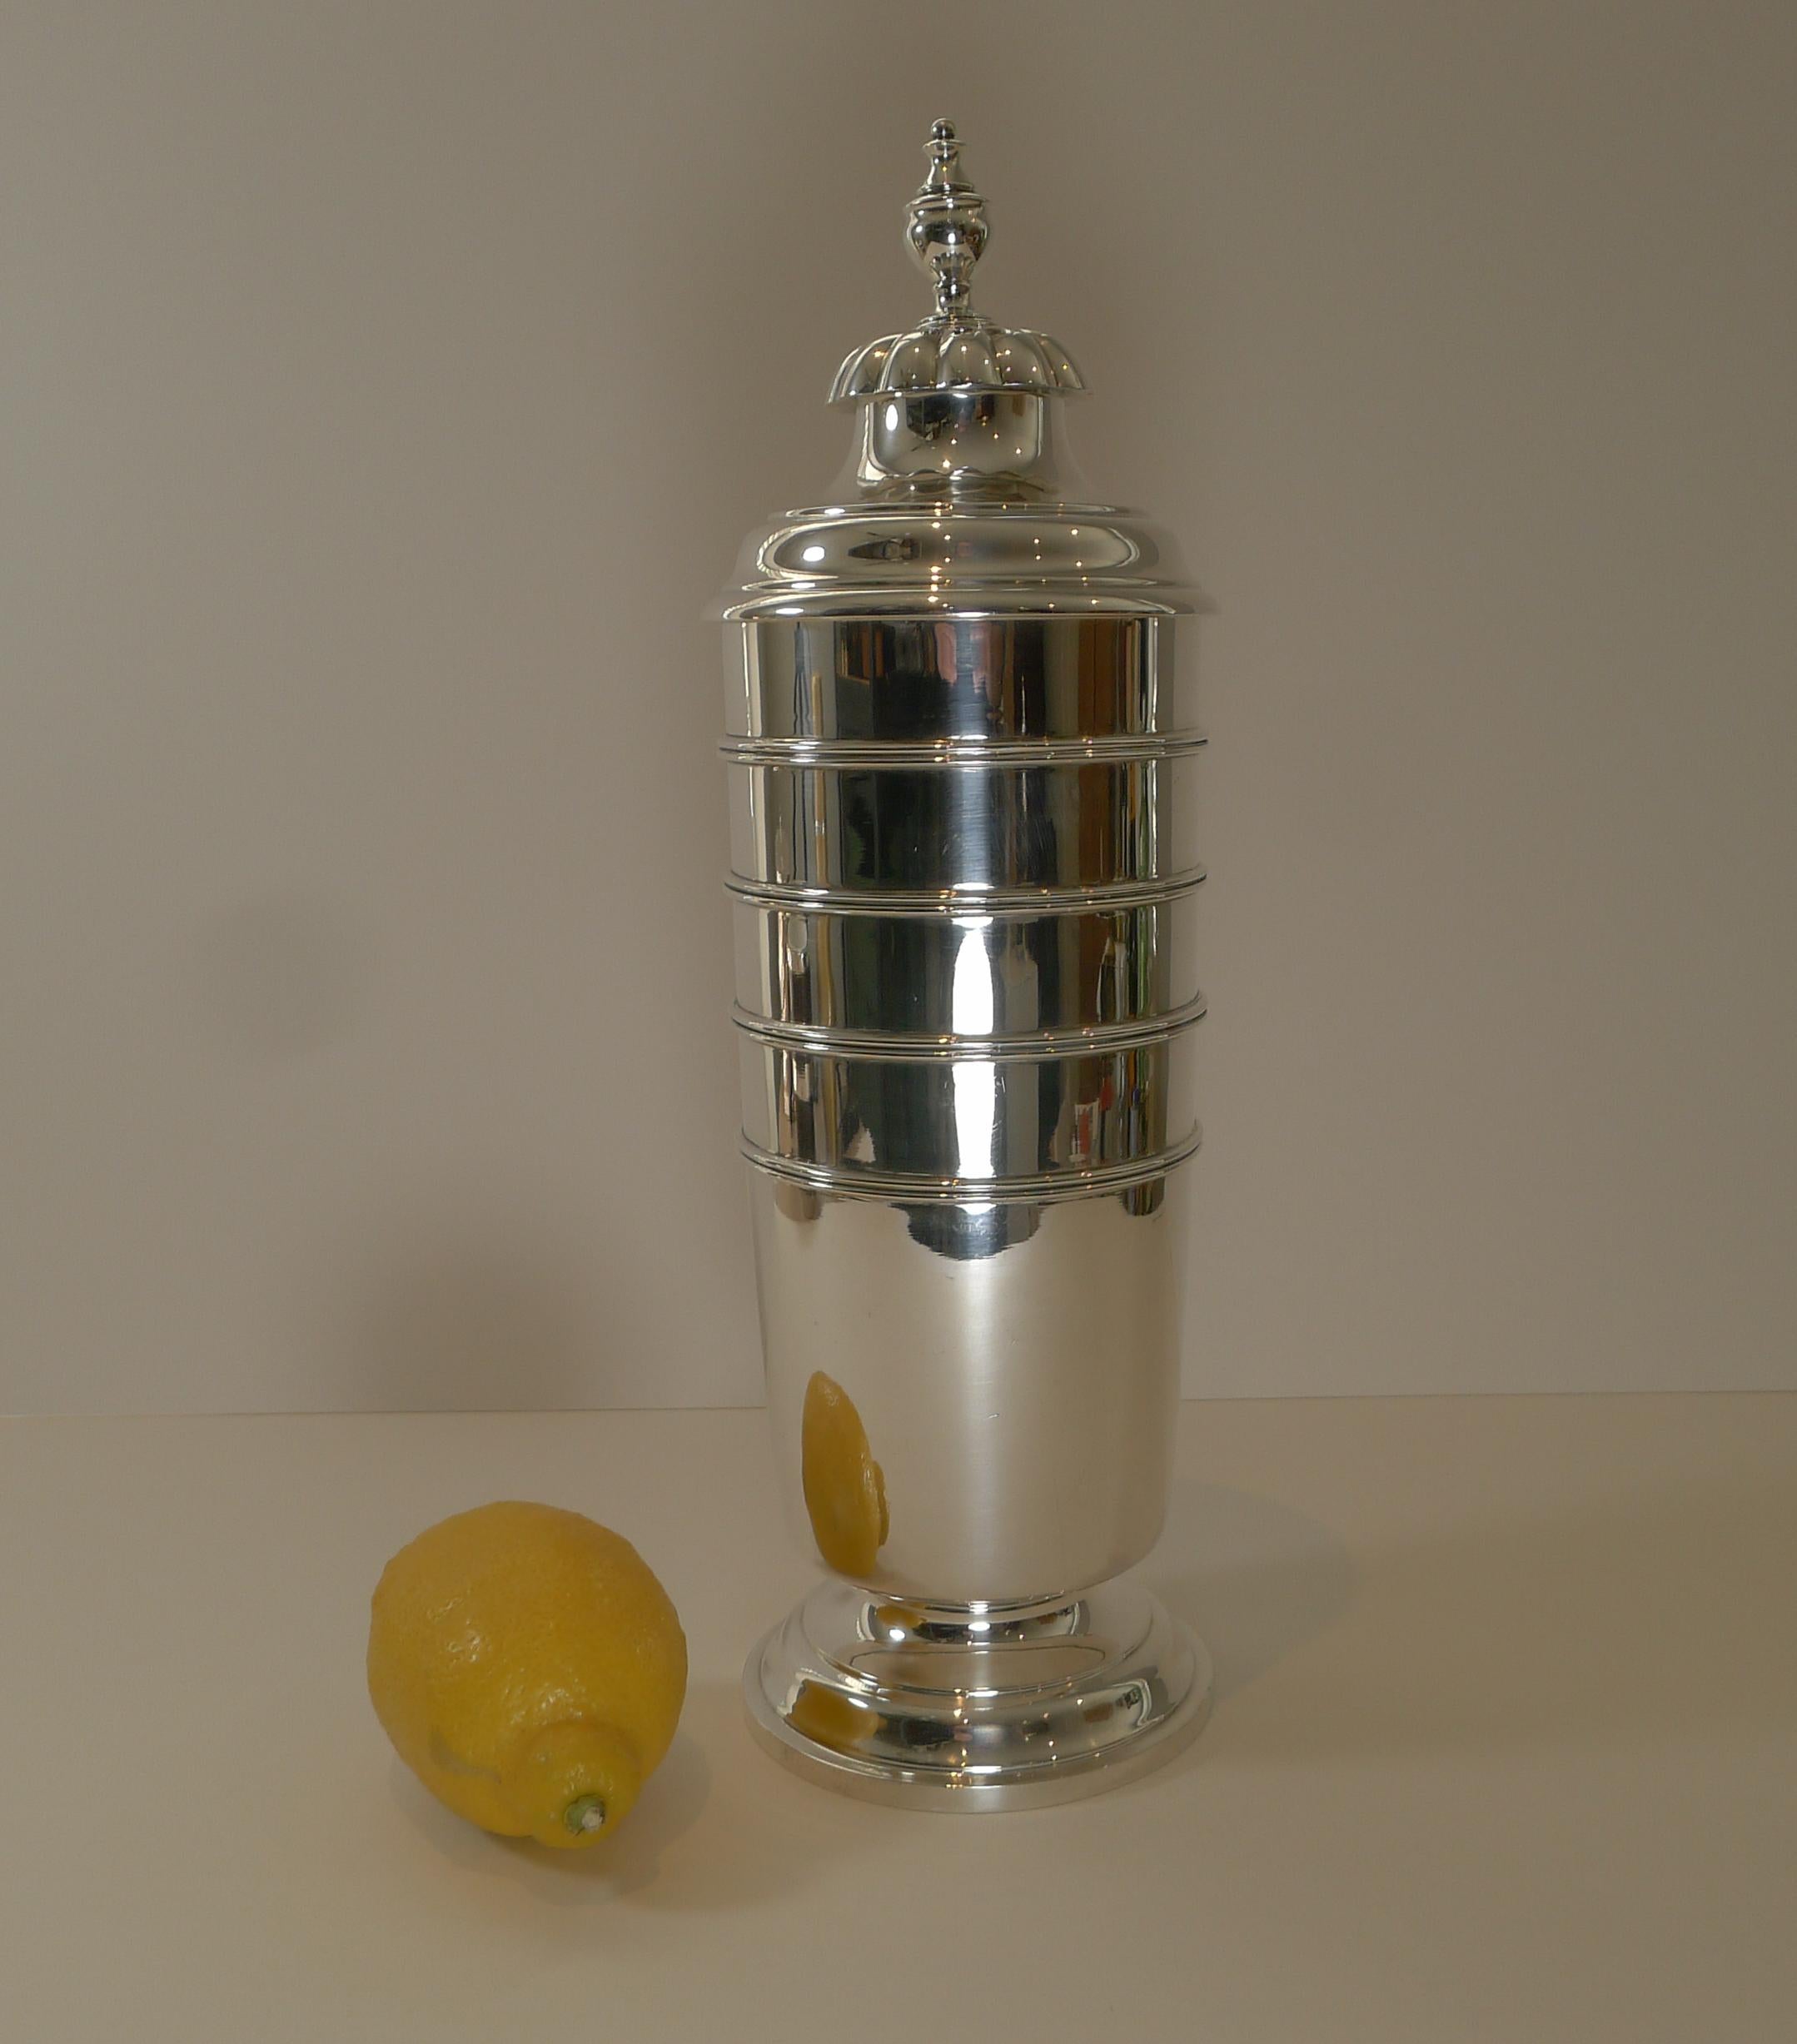 An absolutely stunning huge cocktail shaker in American sterling silver by the Boston silversmith, Tuttle. 

This towering example towers 14